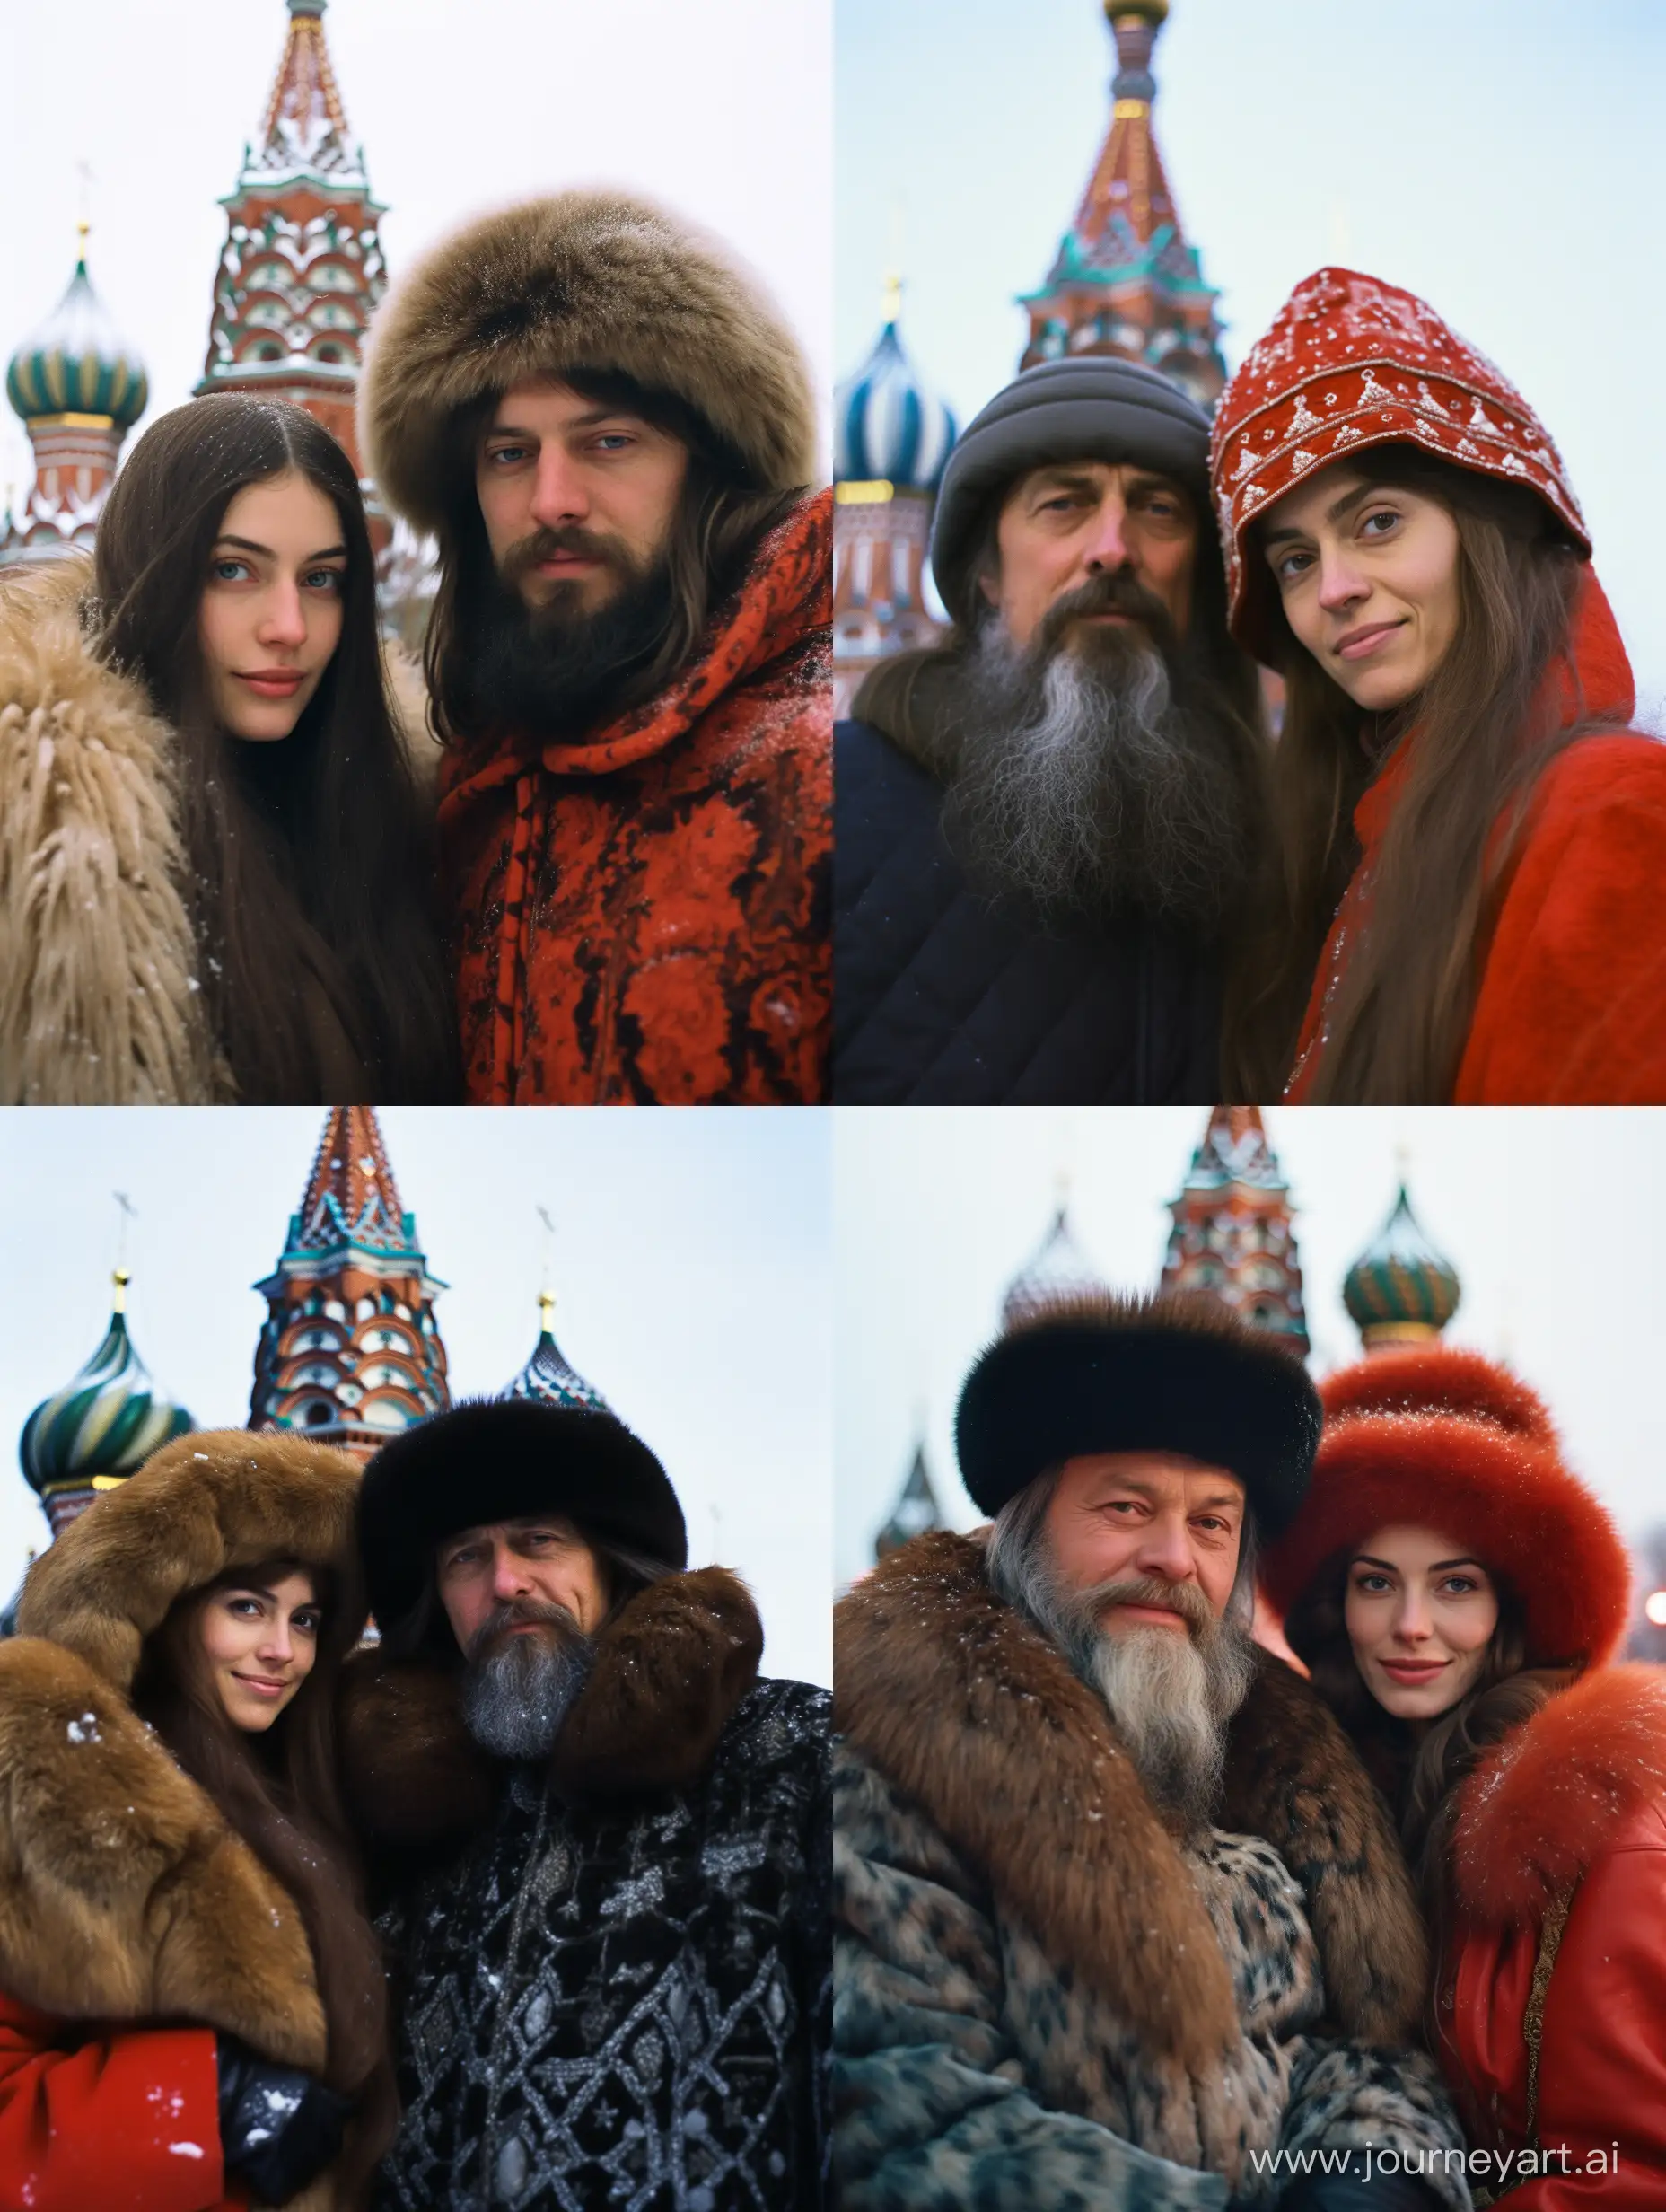 Snowy-Winter-Moment-Old-Man-and-Young-Woman-on-Red-Square-in-Moscow